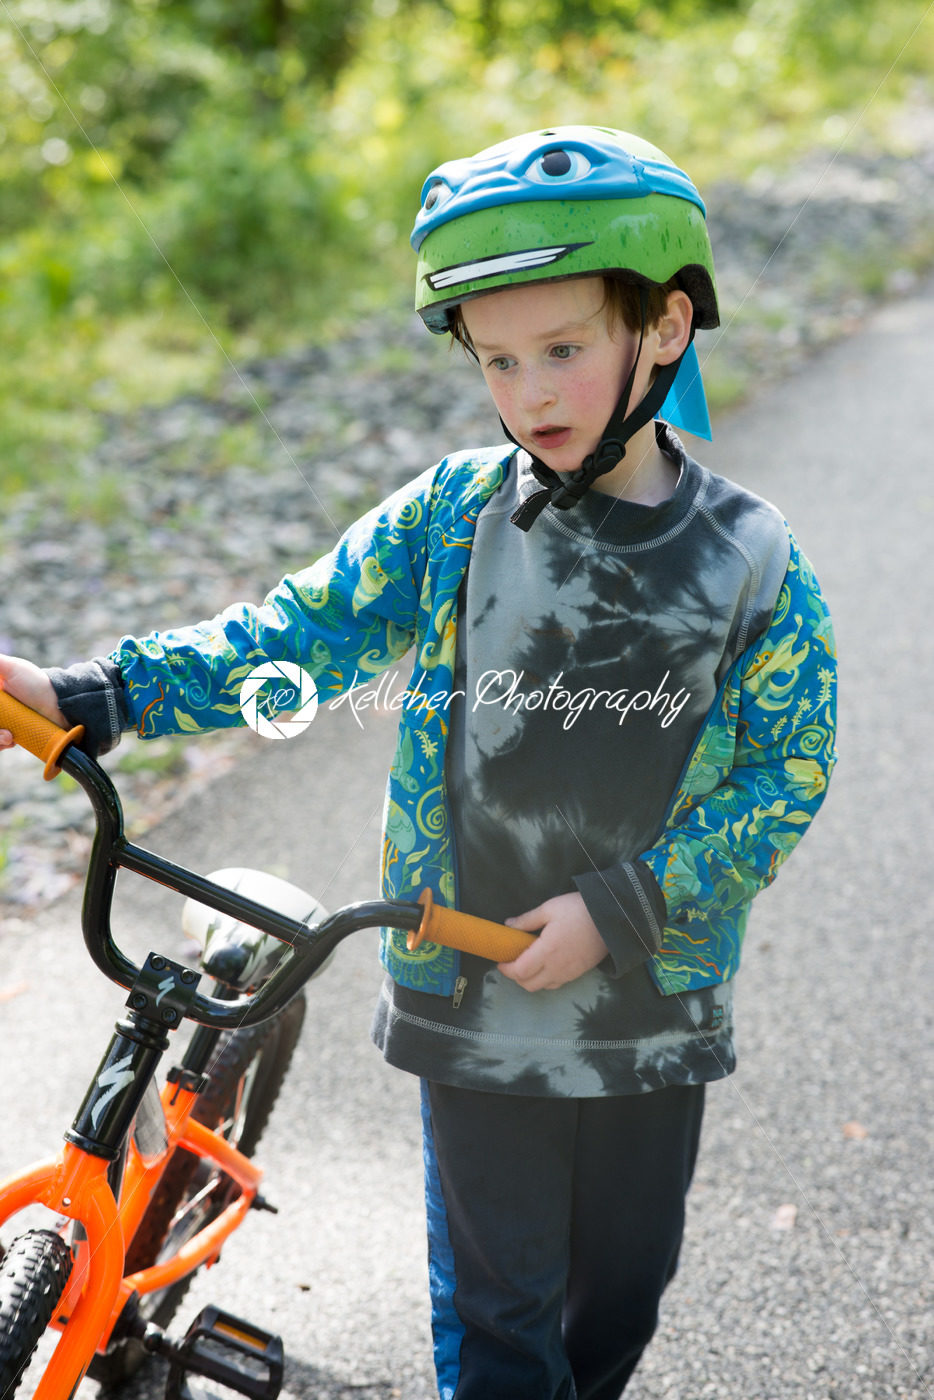 Young Boy Riding Bike on paved trail - Kelleher Photography Store